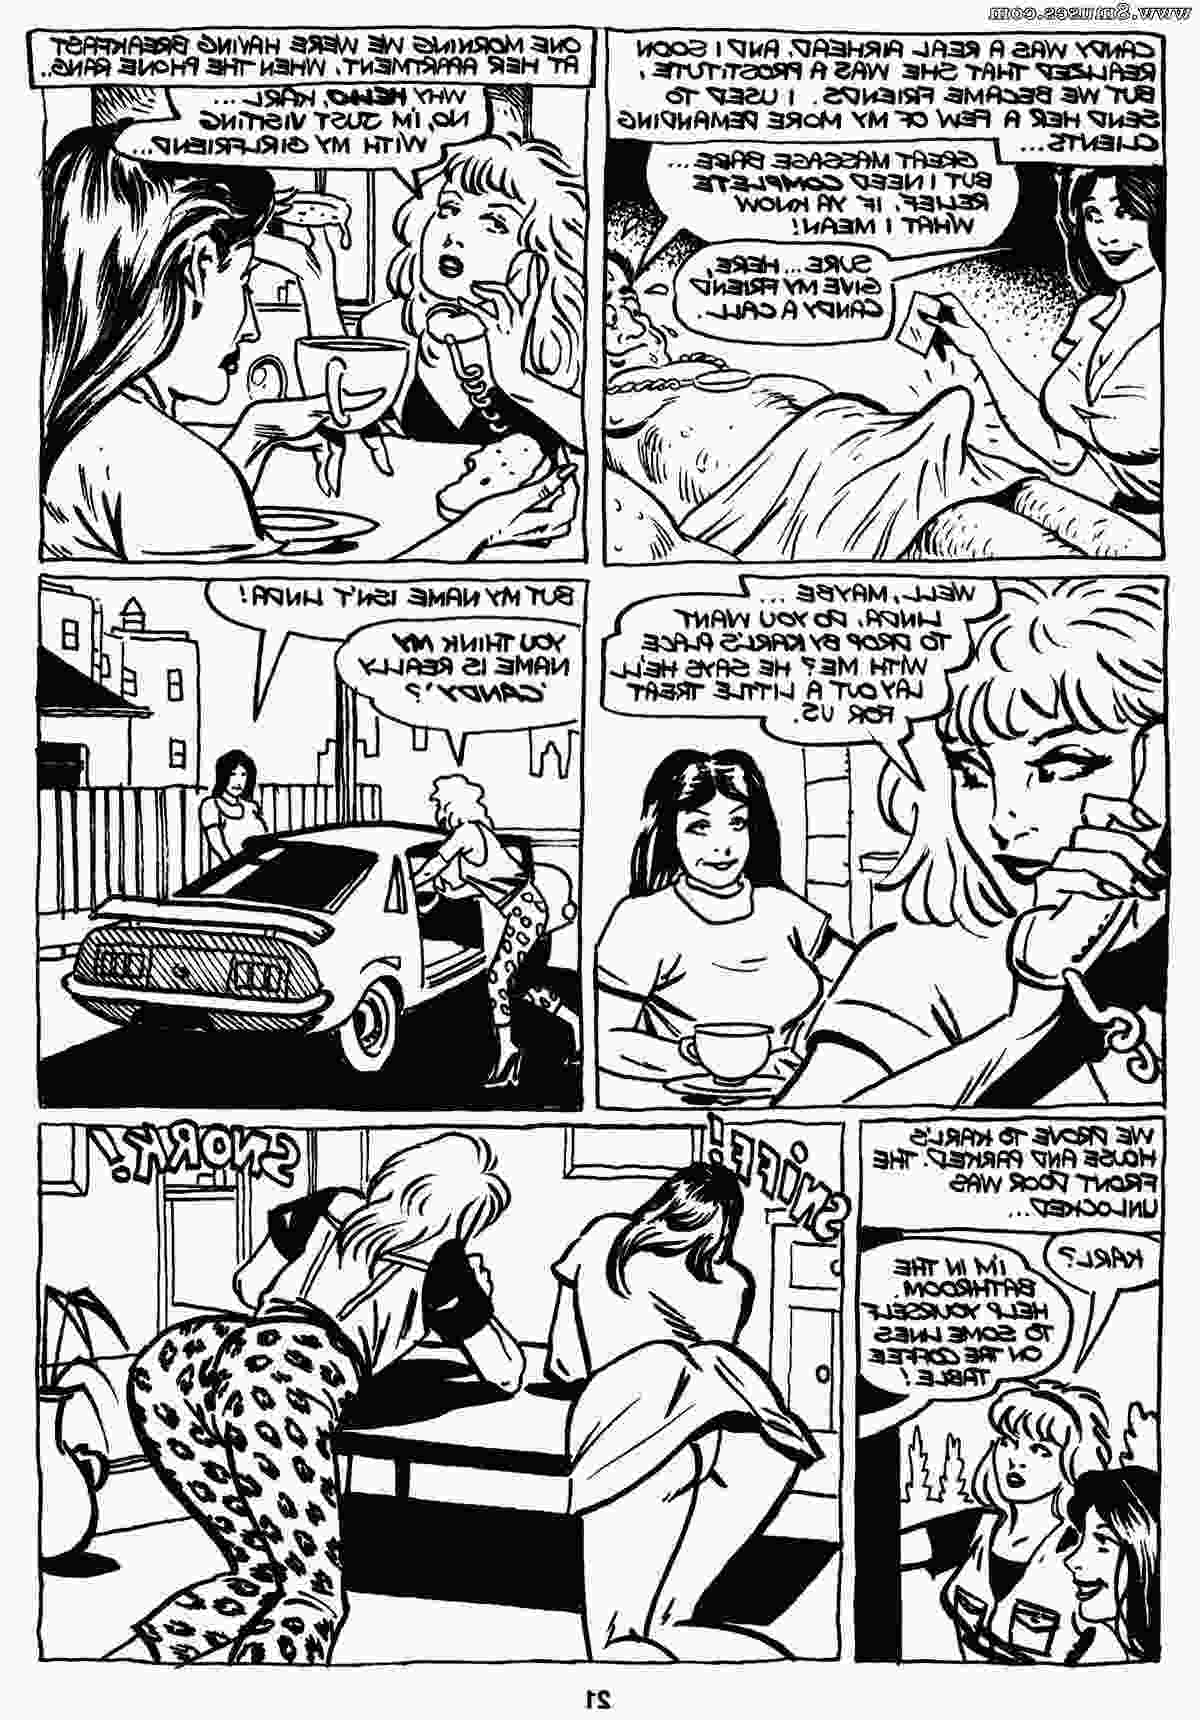 EROS-Comics/Real-Smut Real_Smut__8muses_-_Sex_and_Porn_Comics_23.jpg